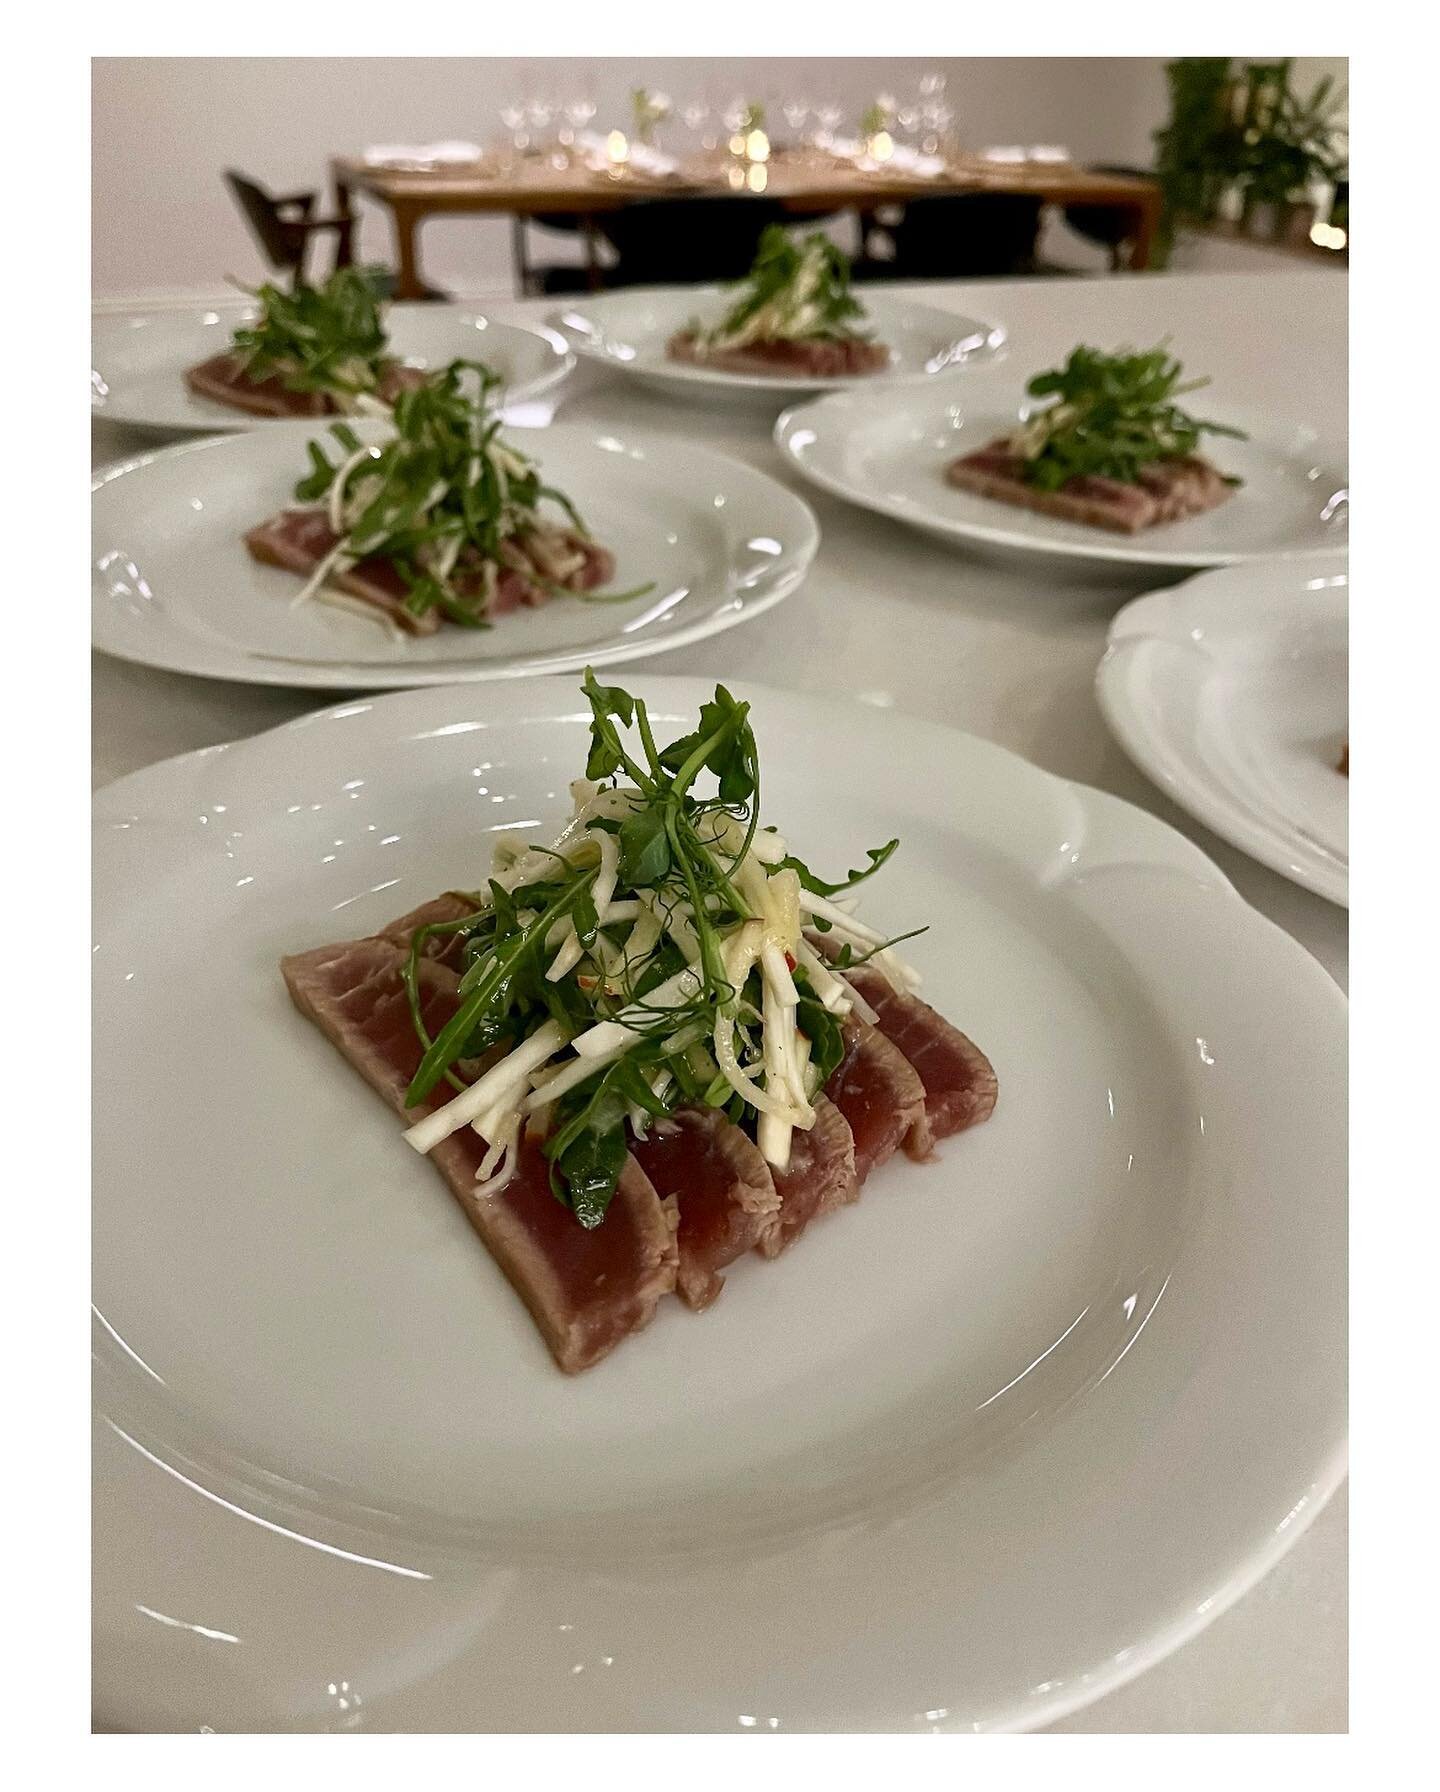 Seared tuna w/ white balsamic, celeriac and apple

#tuna #starter #celeriac #whitebalsamic #dinnerparty #london #spring #entertaining #privatechef #catering #pescatarian #chefsofinstagram #goodfood #foodstagram #eeeeeats #westlondon